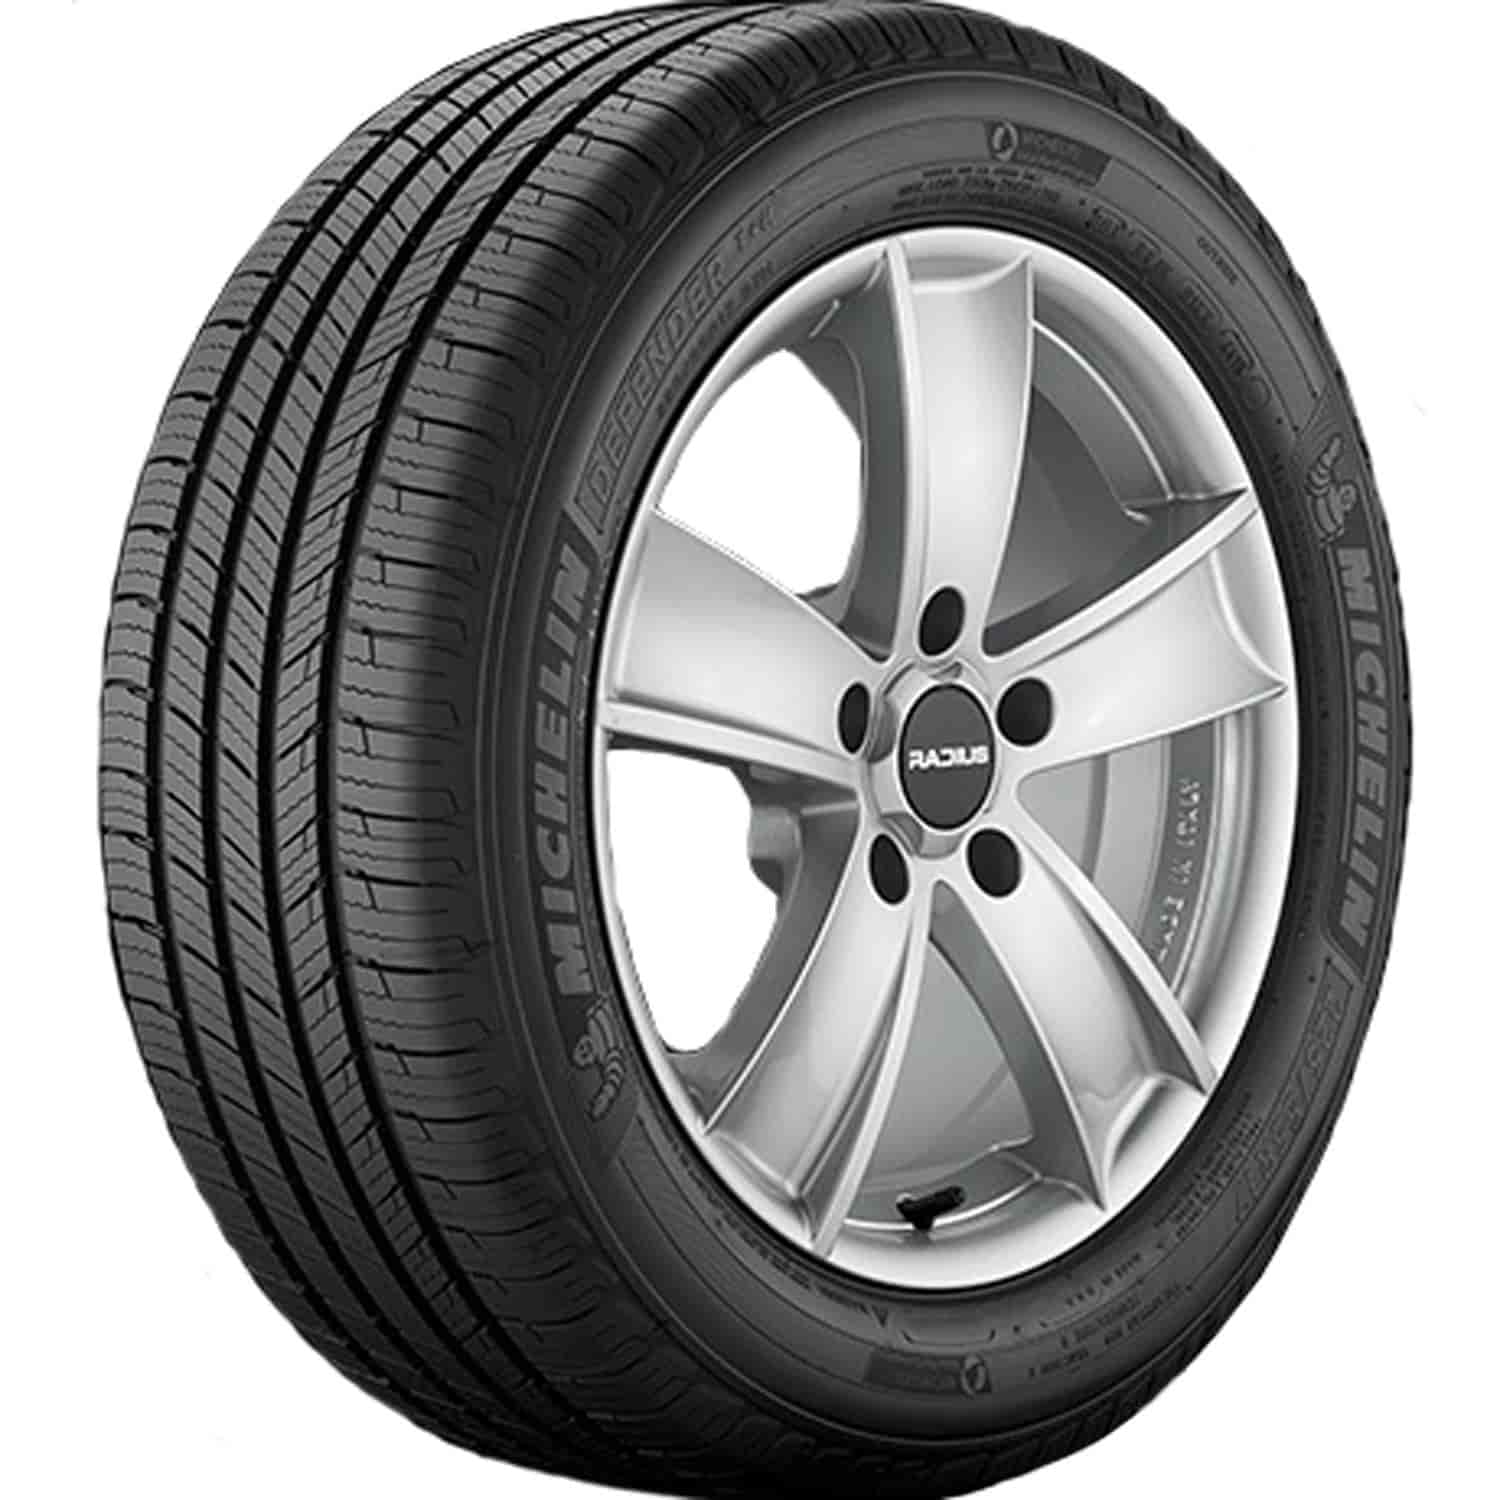 Defender T+H Tire Size:215/55R17